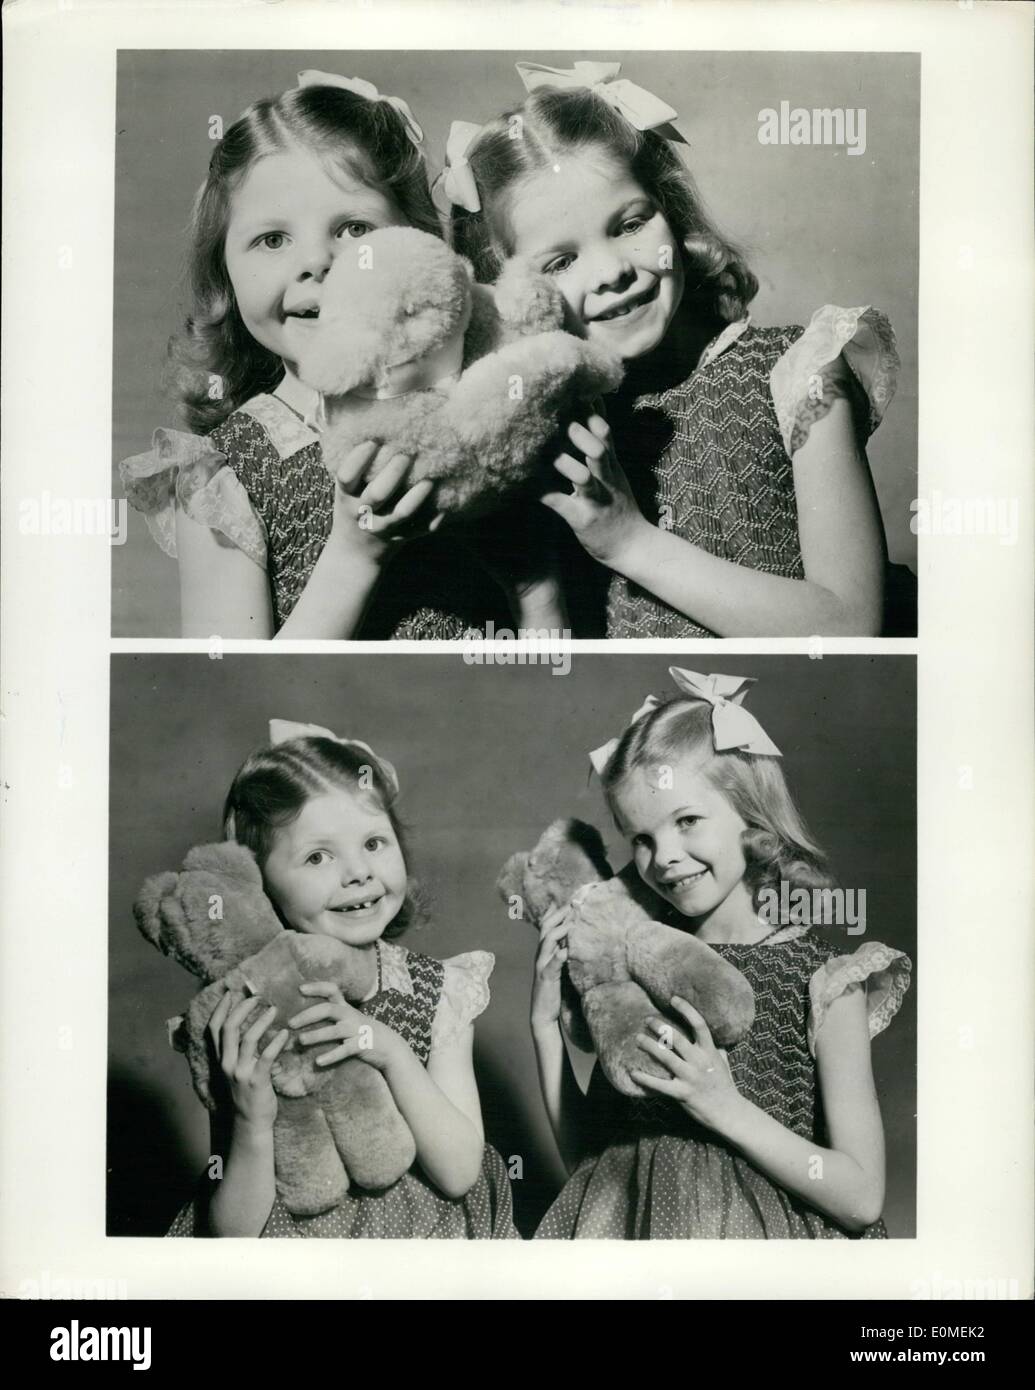 Feb. 02, 1955 - Twins Play Musical Bears - and Ducks: Music boxes in the form of cuddly animals are among toys being shown at this year's British Industries Fair, London and Bermingham, May 2-13. Photo show Top: Seven-year-old twins Judith (left) and Sally Stephens listening to their toy duck and duckling. As it play a tune, the duckling on the back of the duck moves up and down. Bottom: The twinshold to musical bears, one of which can be wound by turning the leg and the other, the head. Manufacturers: The Nedor Co. 2 Hazel Gardens , Edgware, London England. Stock Photo